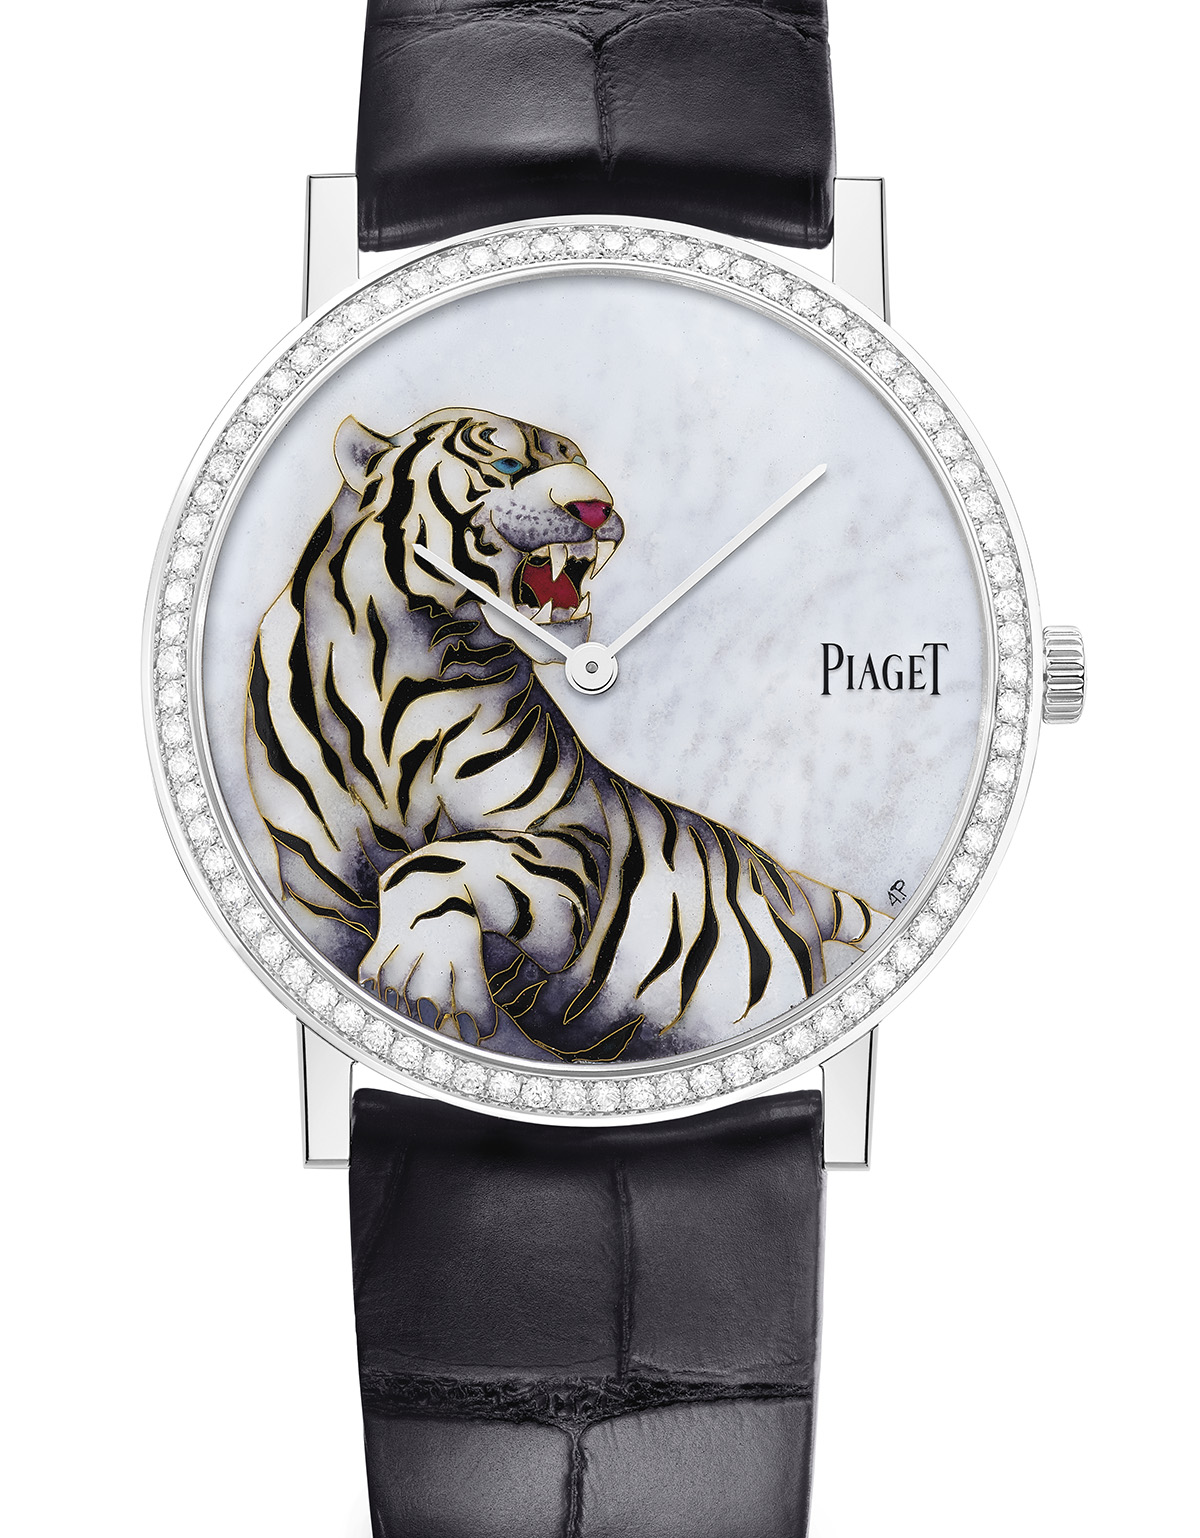 Piaget Altiplano Chinese New Year Tiger watch